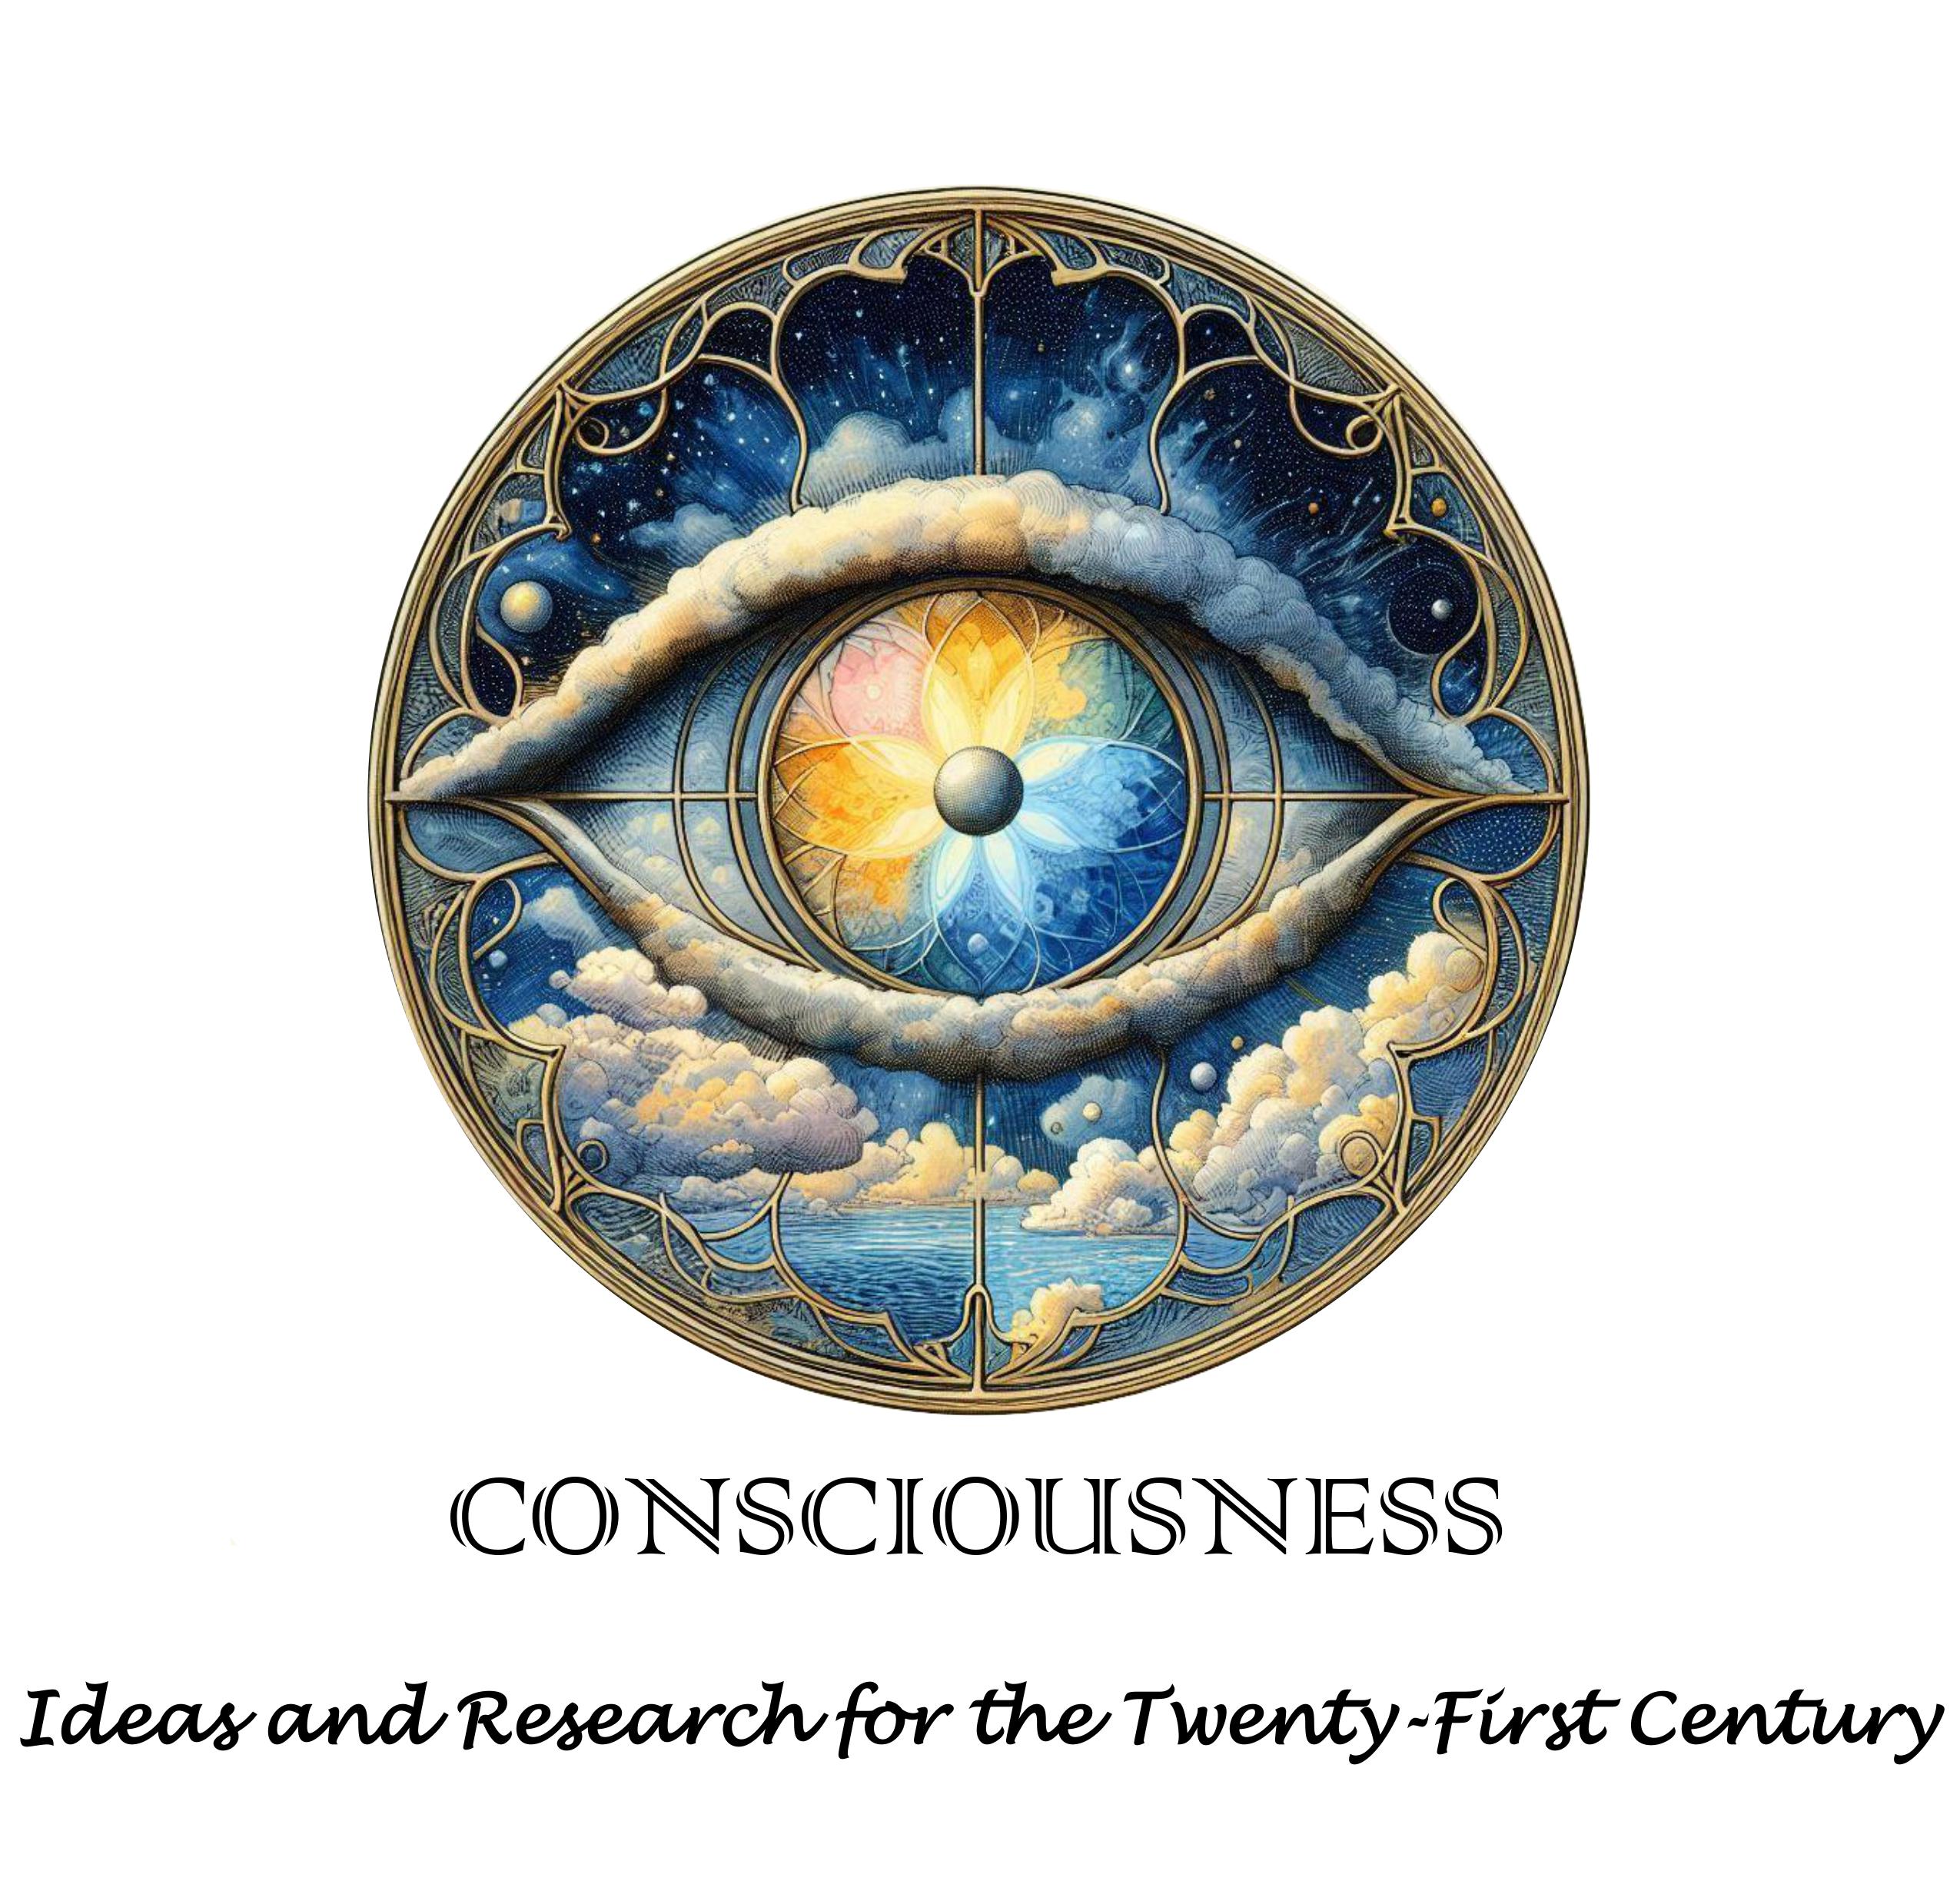 CONSCIOUSNESS: Ideas and Research for the Twenty-First Century